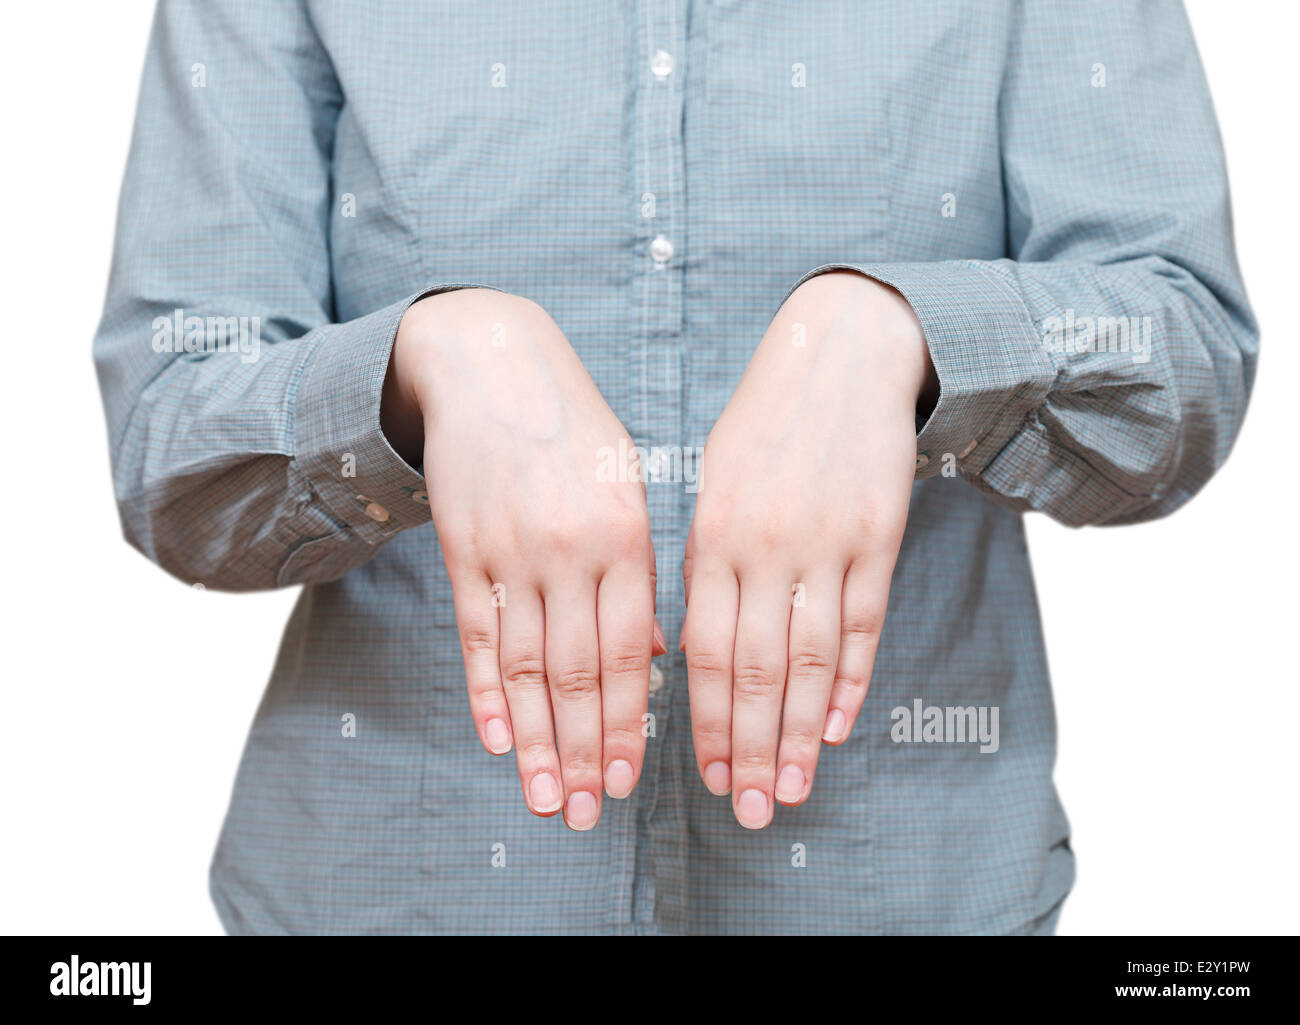 turn out hand gesture isolated on white background Stock Photo